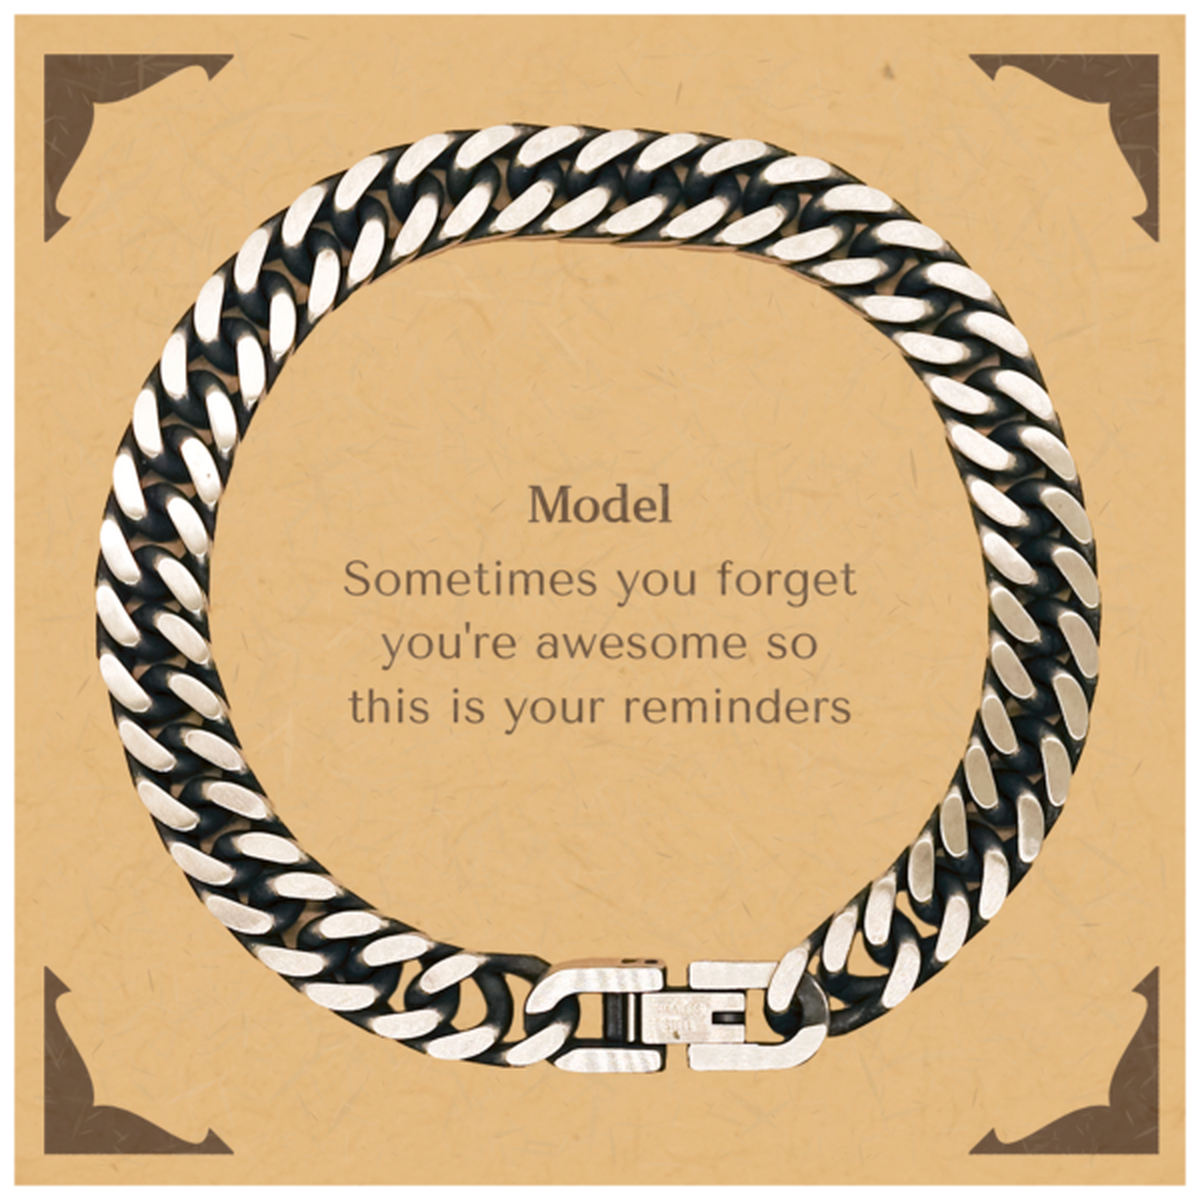 Sentimental Model Cuban Link Chain Bracelet, Model Sometimes you forget you're awesome so this is your reminders, Graduation Christmas Birthday Gifts for Model, Men, Women, Coworkers